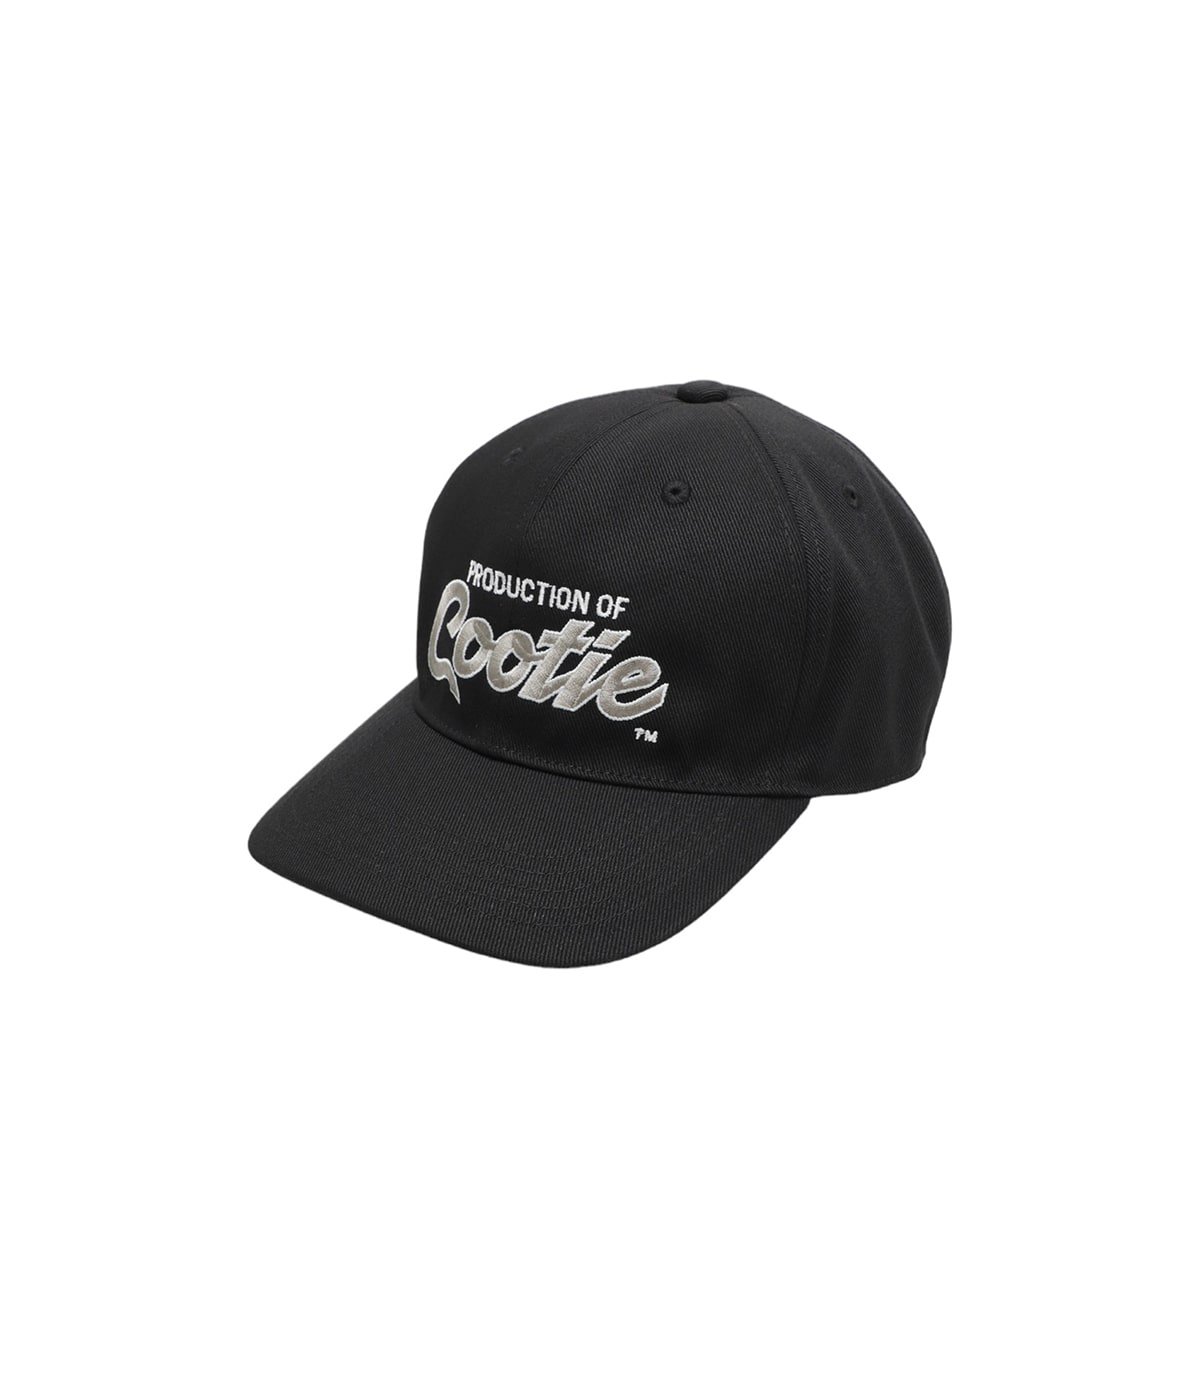 Embroidery T/C Gabardine 6 Panel Cap (PRODUCTION OF COOTIE